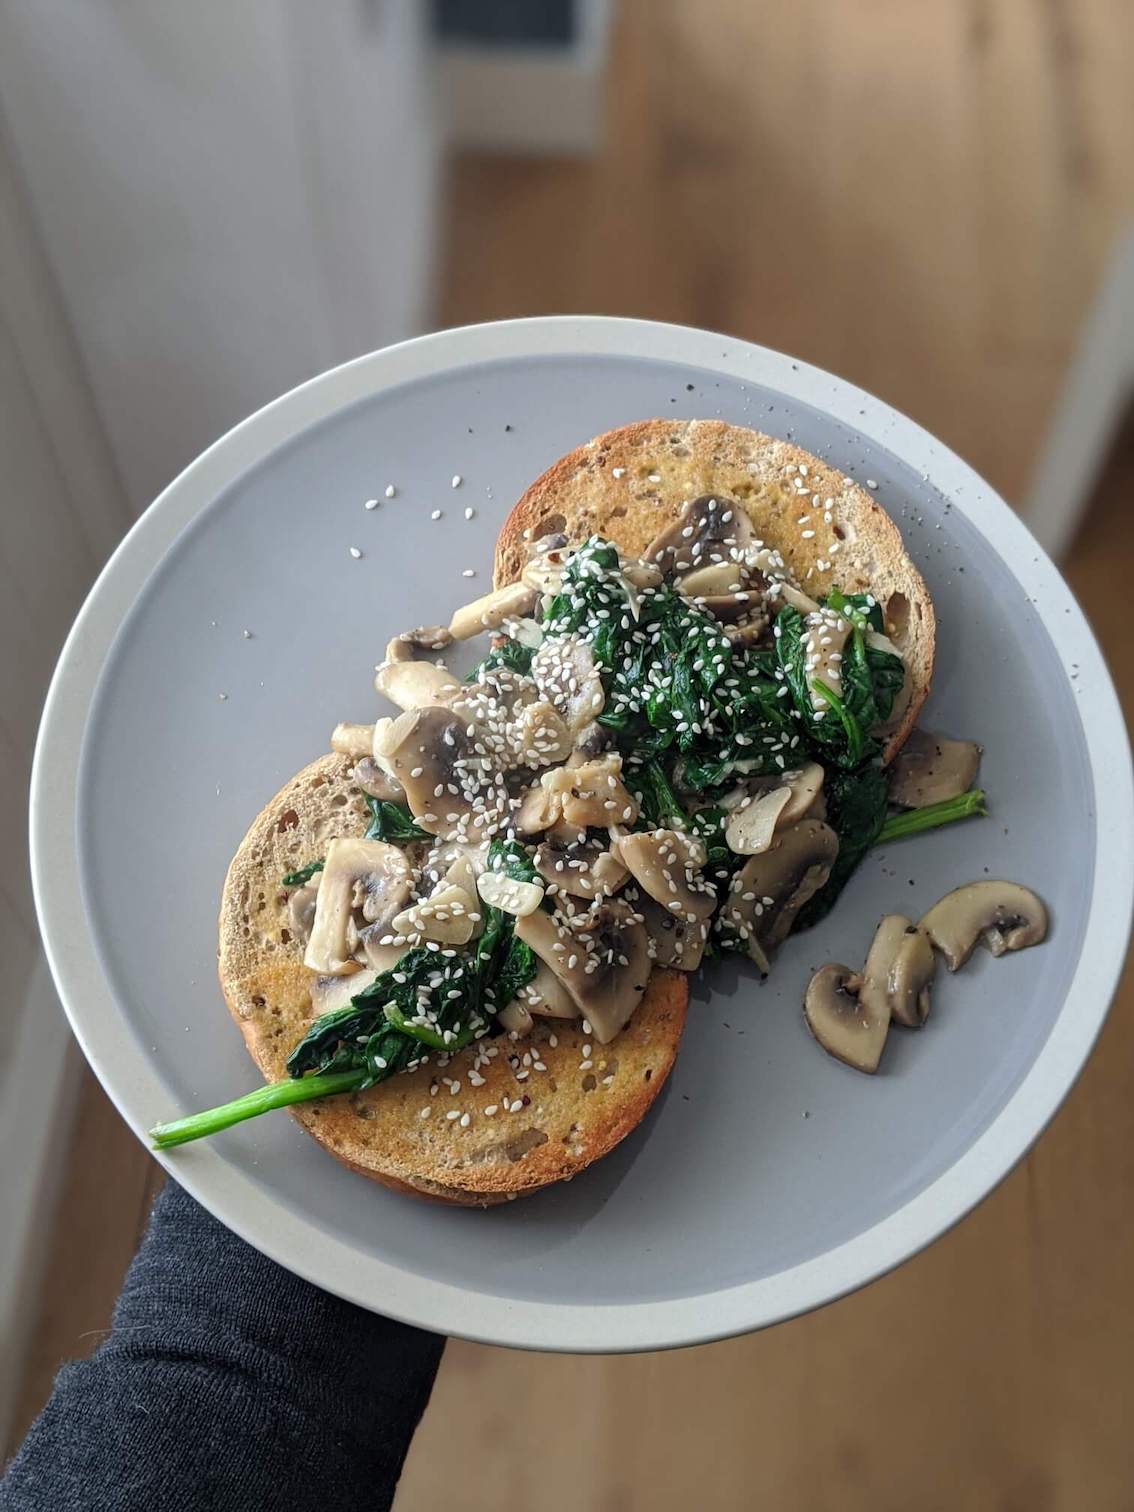 Miso, mushroom, coconut and spinach on a bagel